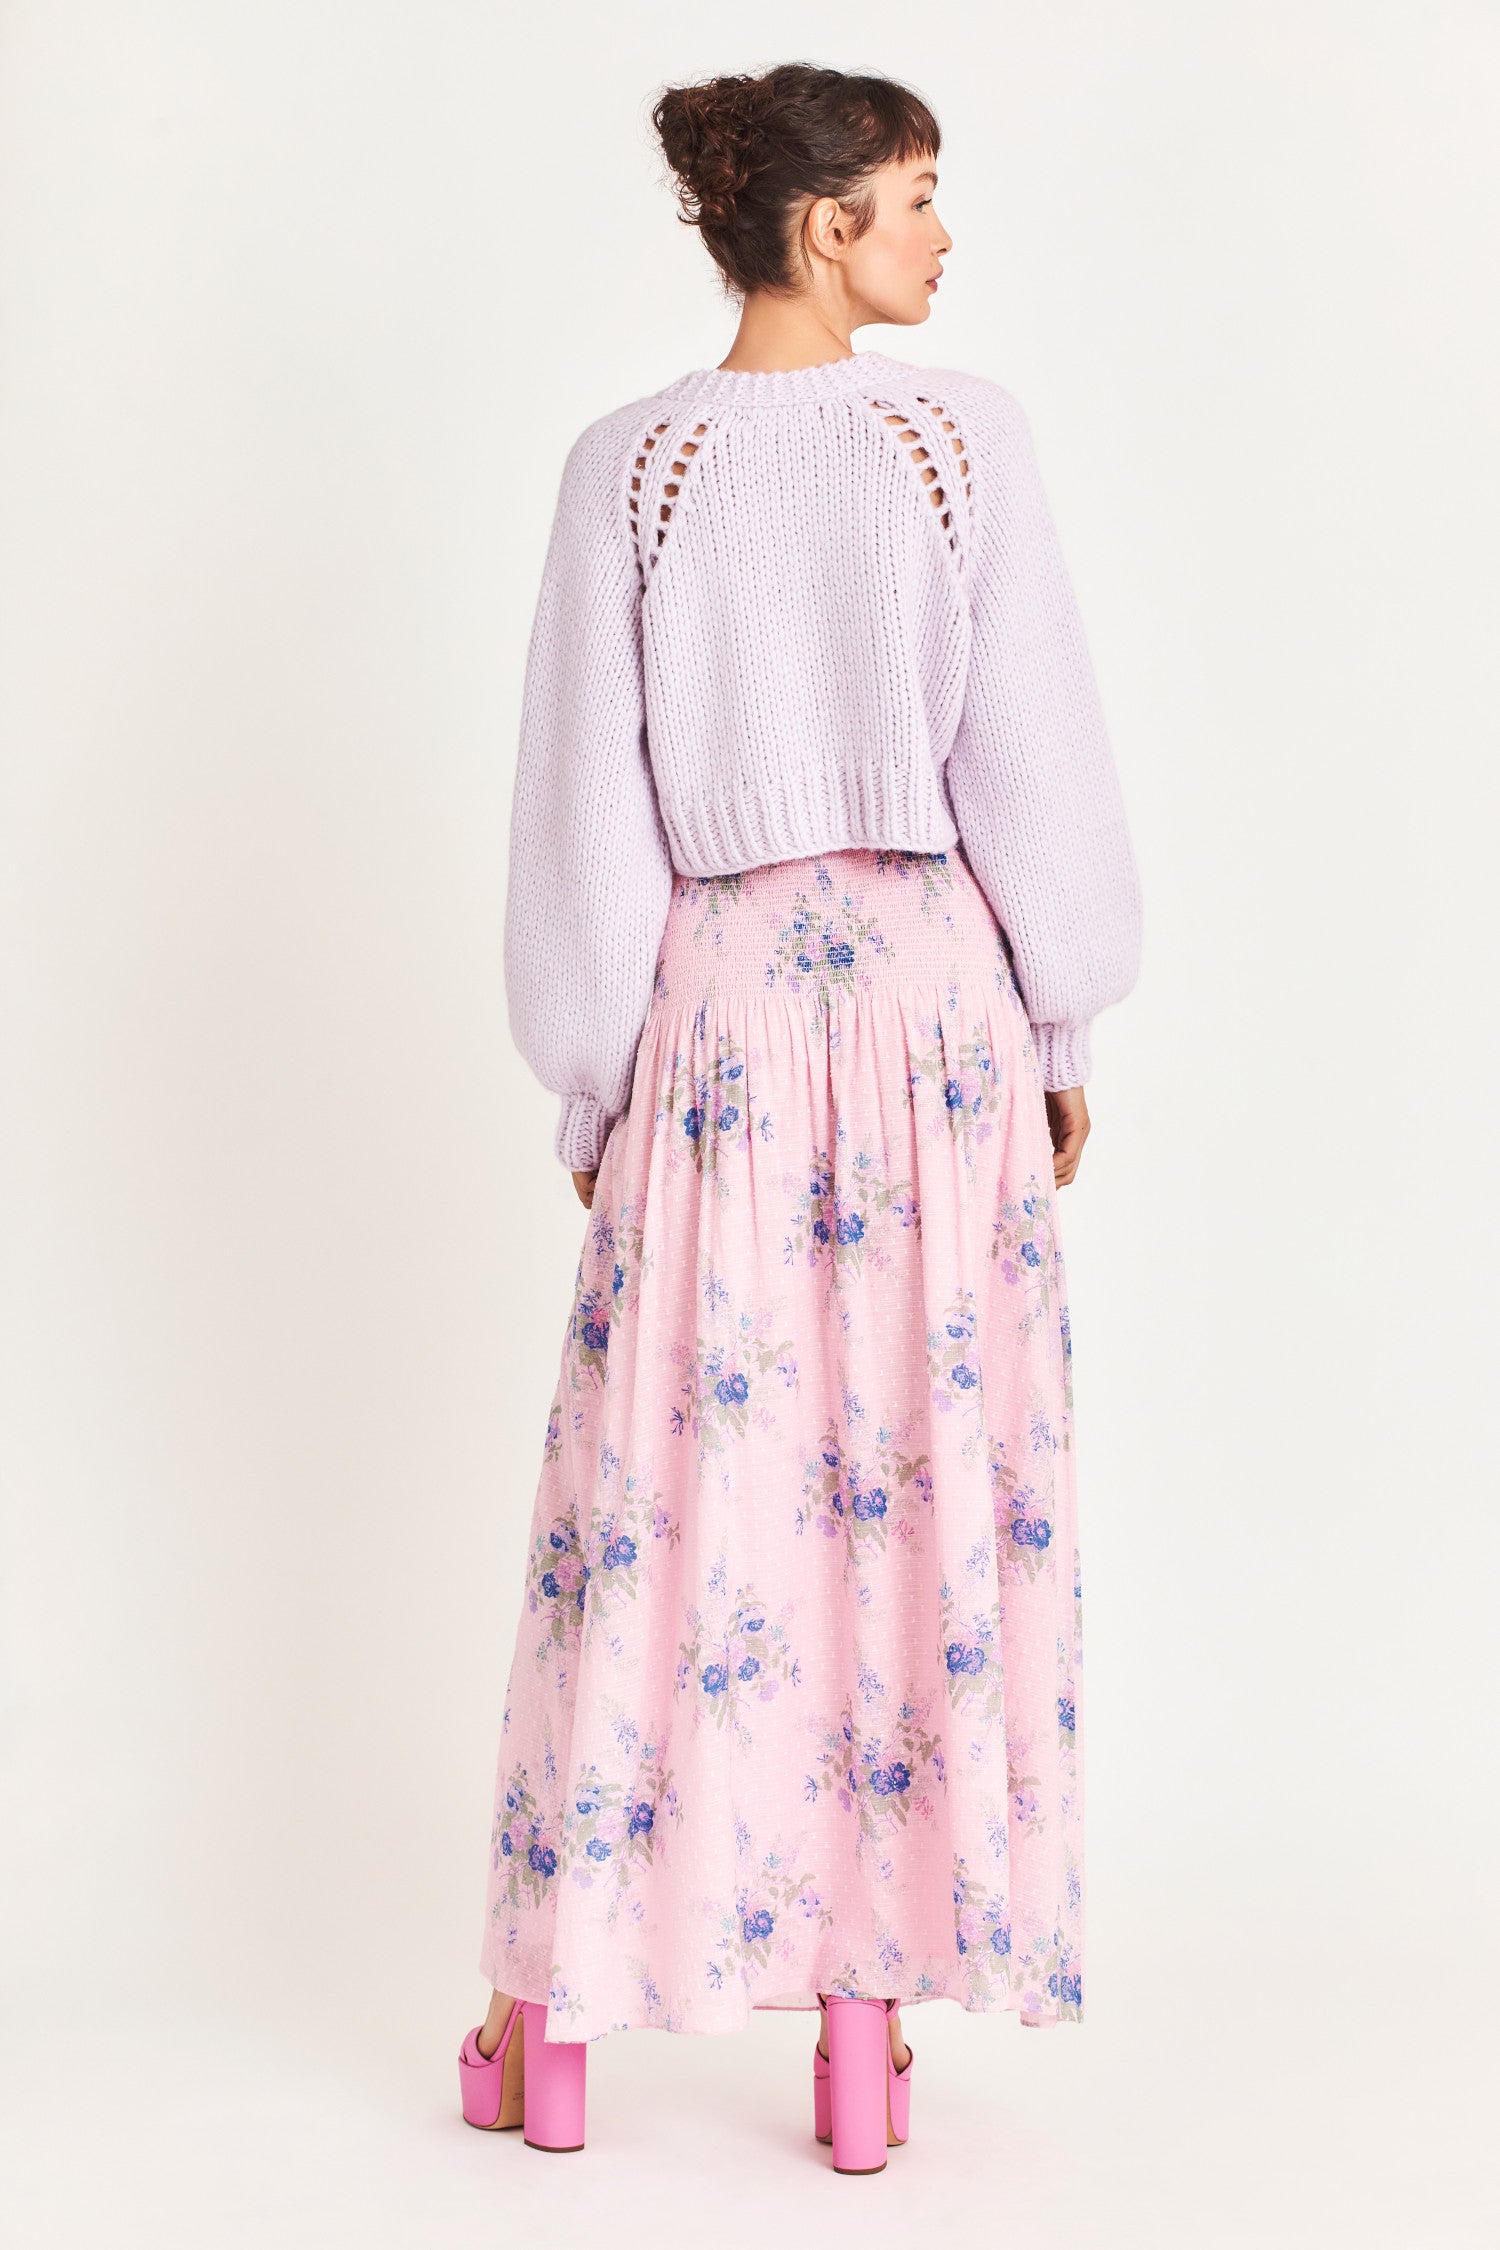 Falune Maxi skirt features an heirloom bouquet on a soft, textured pink dot fabric. It has a smocked hip yoke and an added sleep for sexiness. 